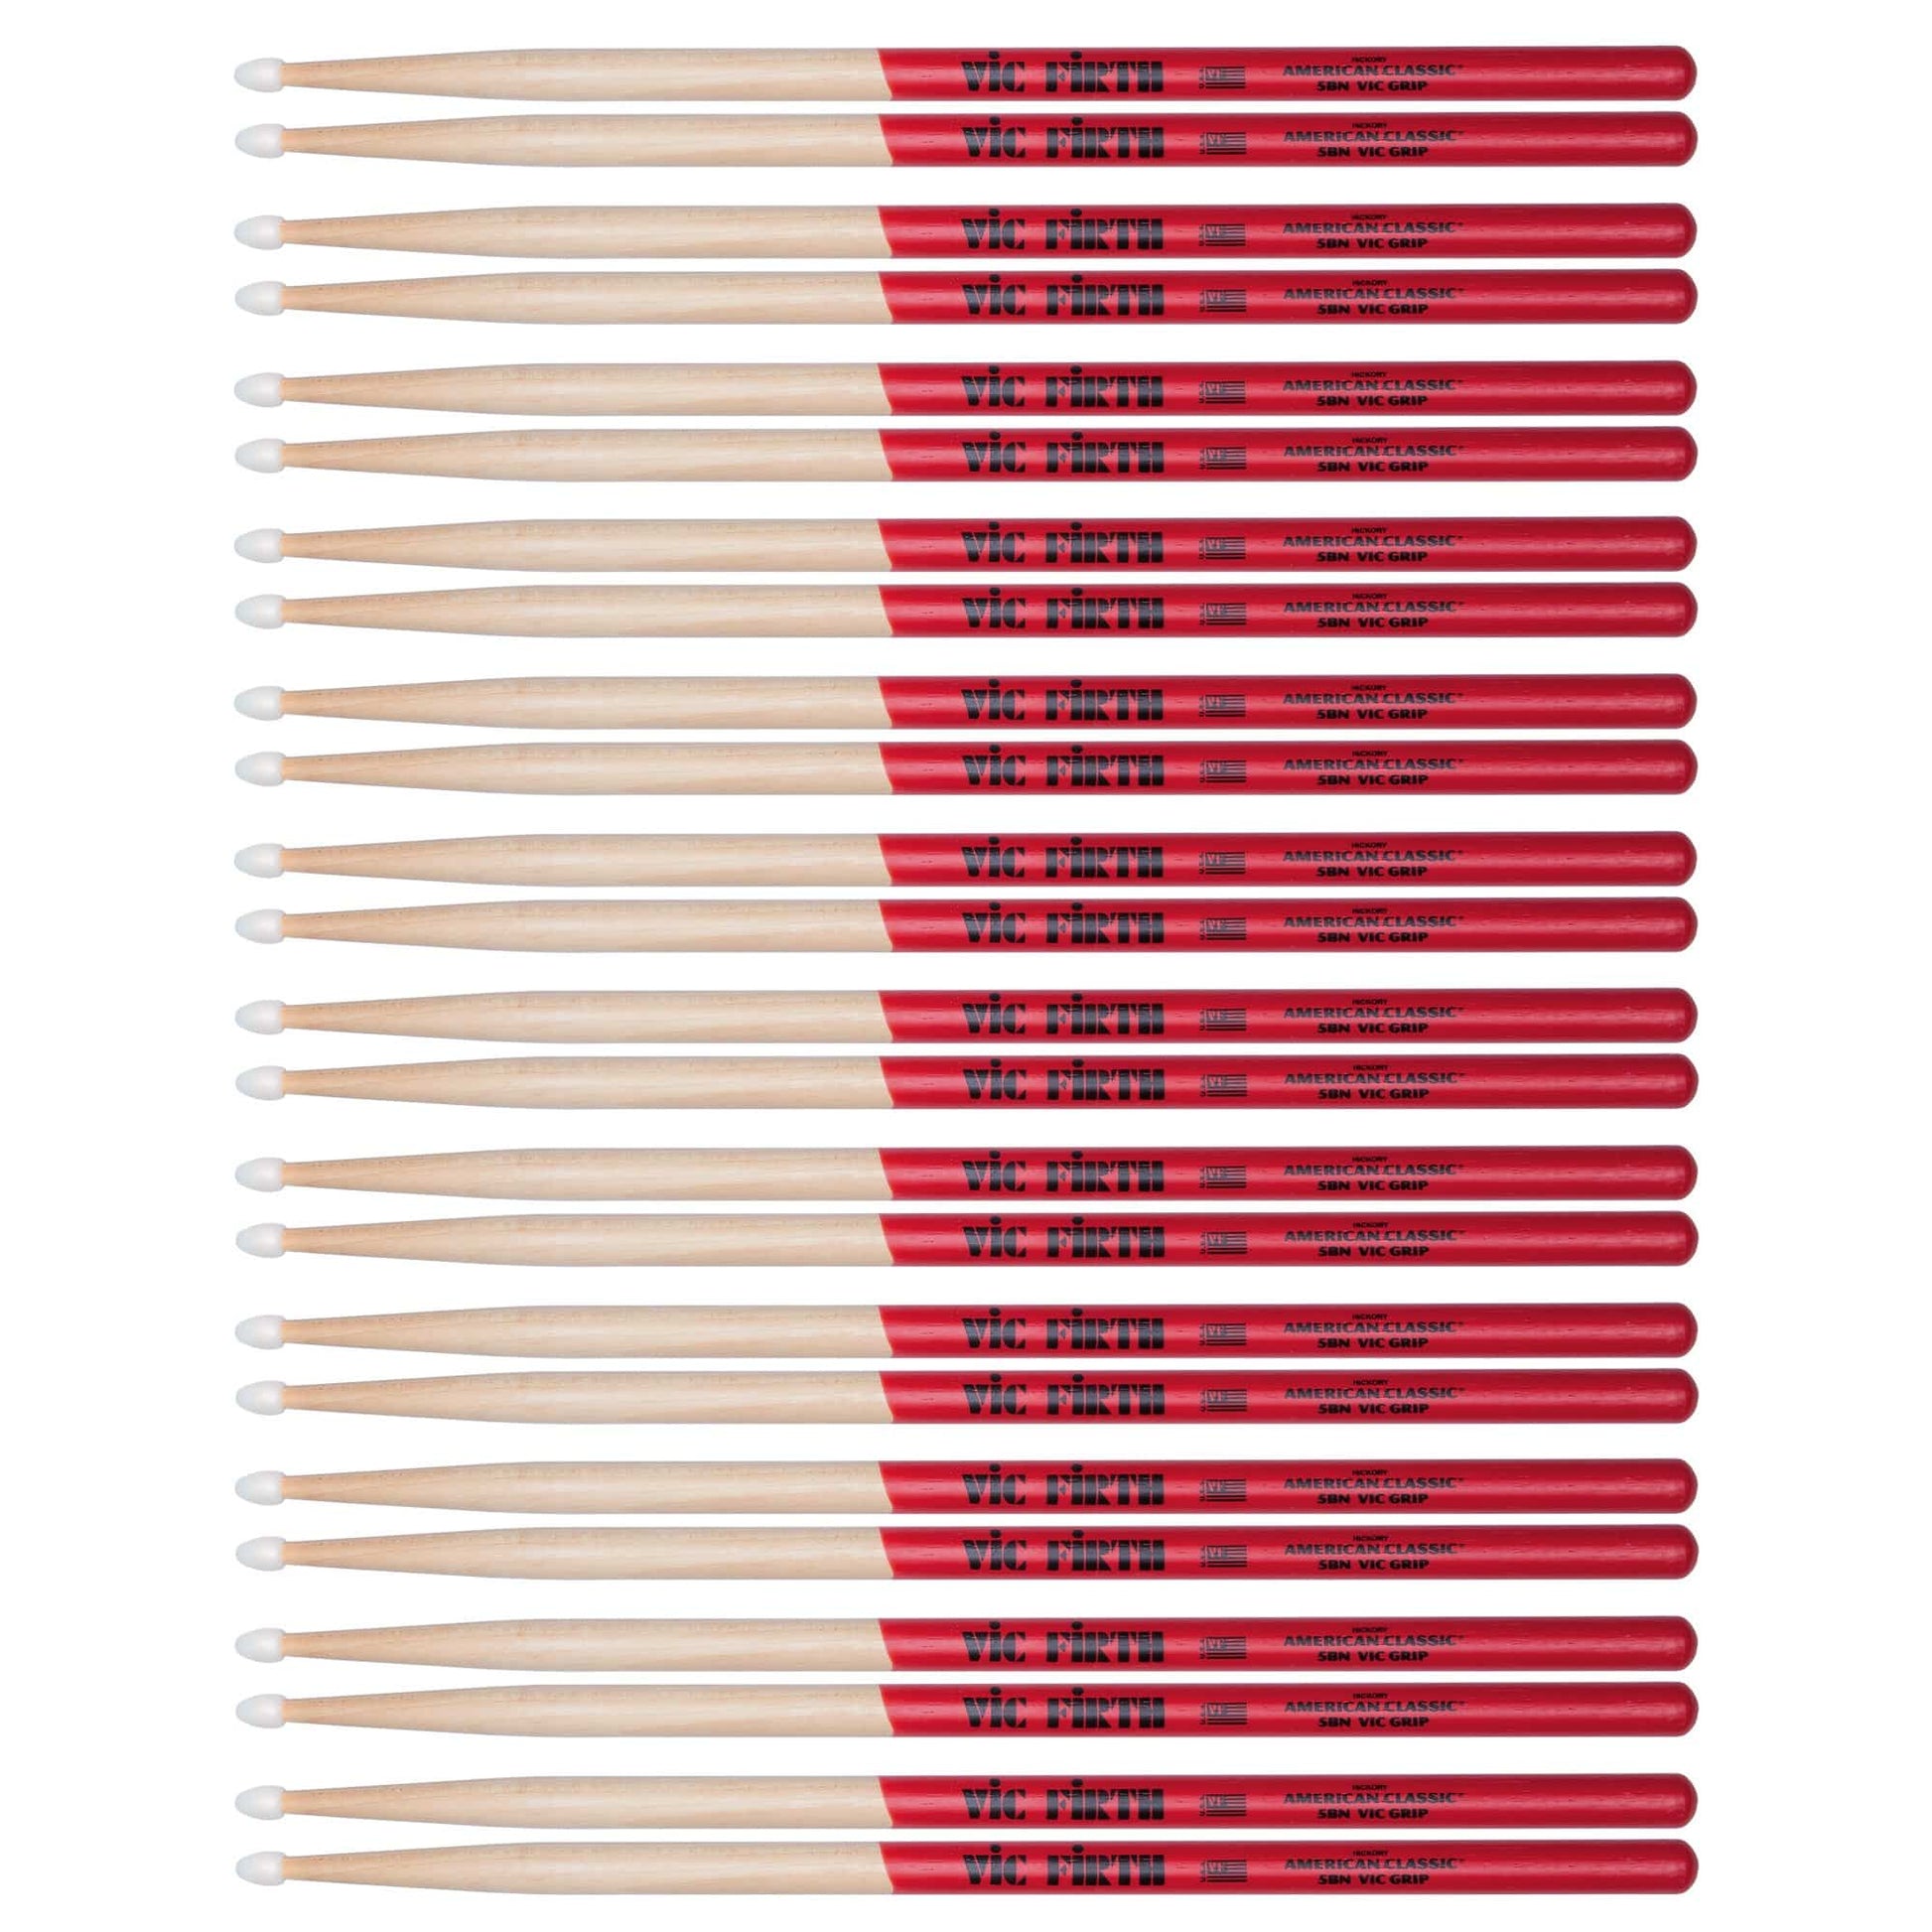 Vic Firth American Classic 5B Vic Grip Nylon Tip Drum Sticks (12 Pair Bundle) Drums and Percussion / Parts and Accessories / Drum Sticks and Mallets